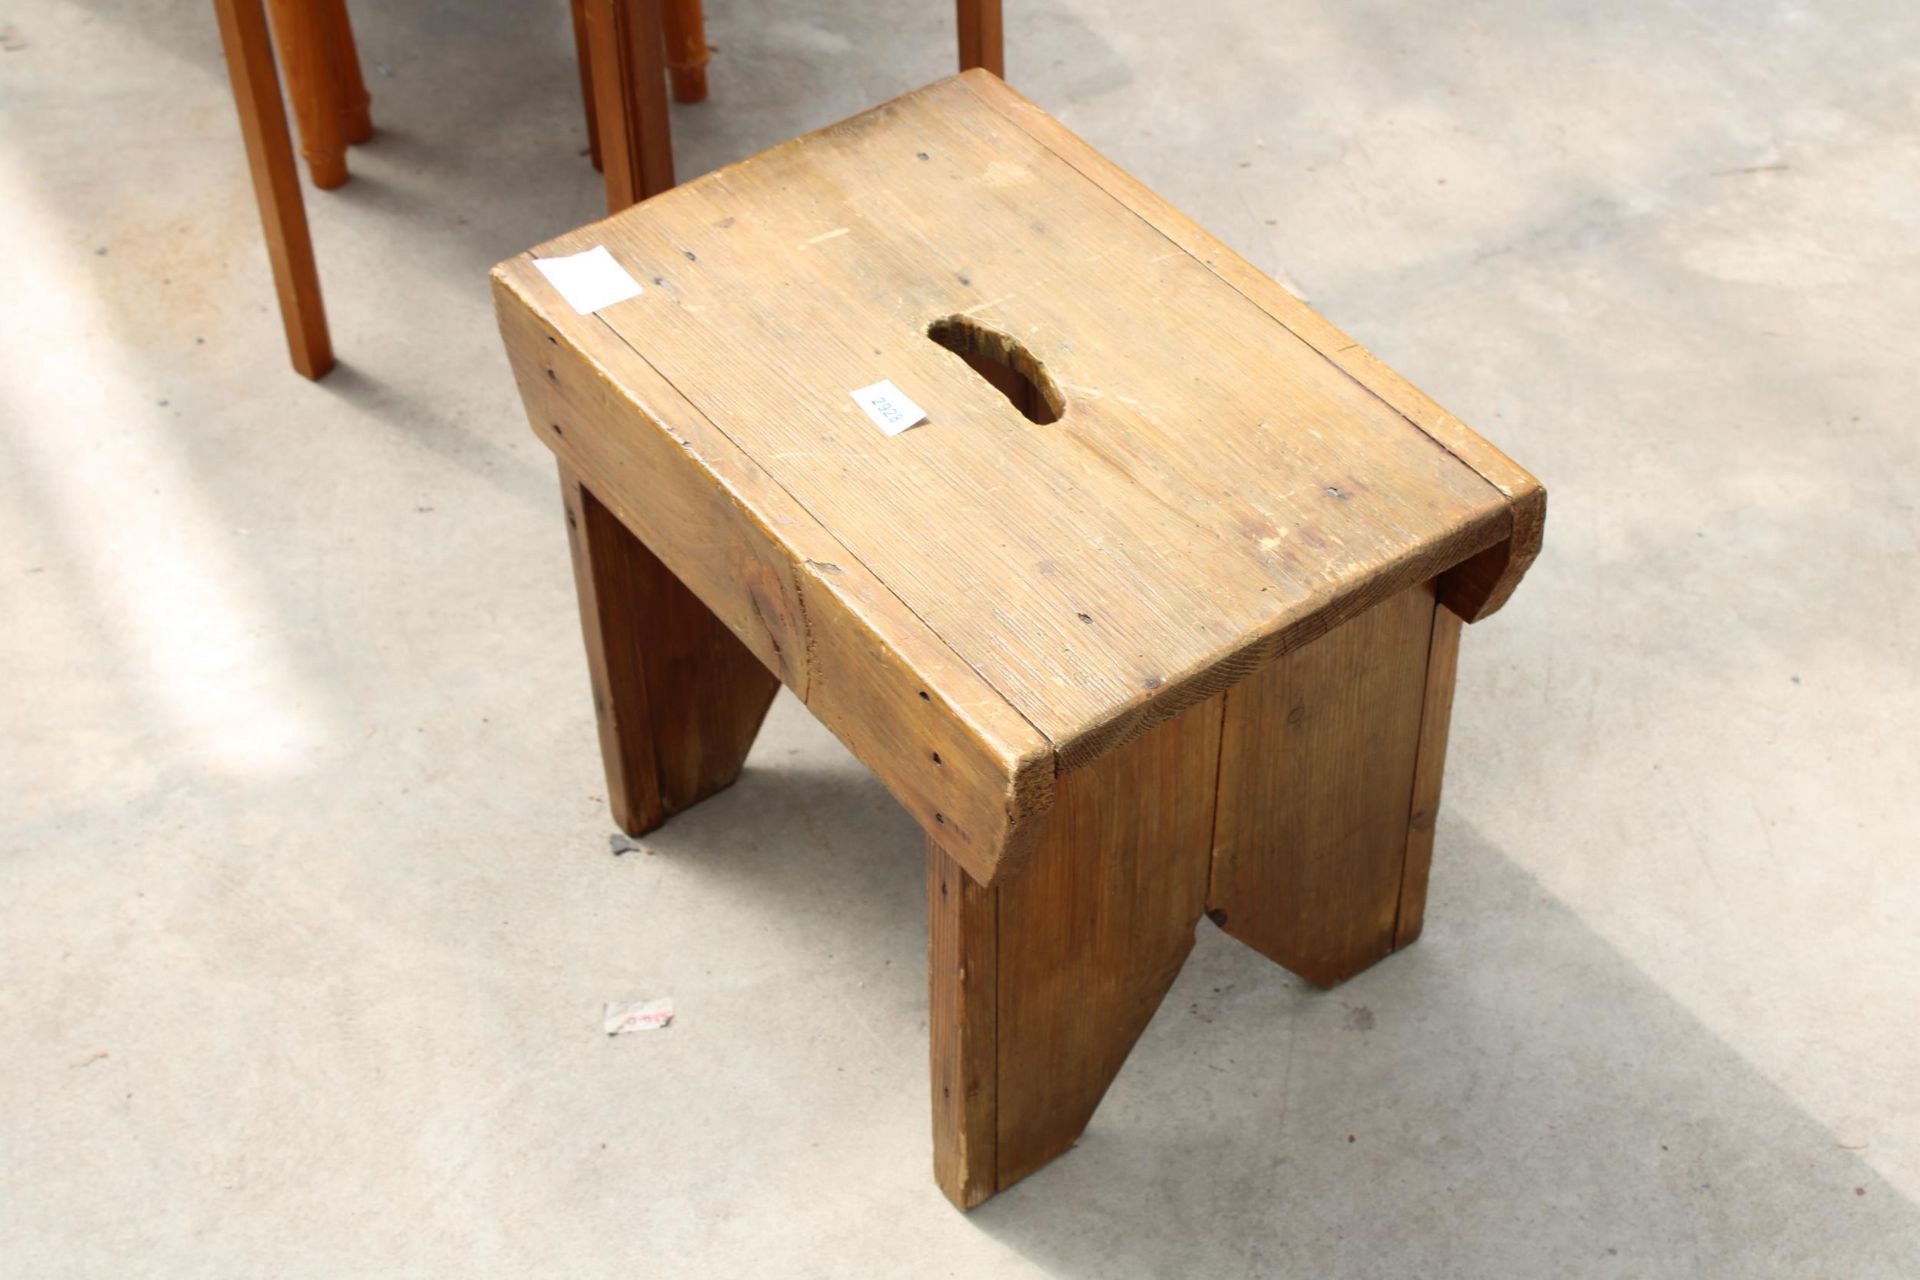 A PINE STOOL, SMALL TEAK TABLE AND A NEST OF TWO TABLES - Image 2 of 3